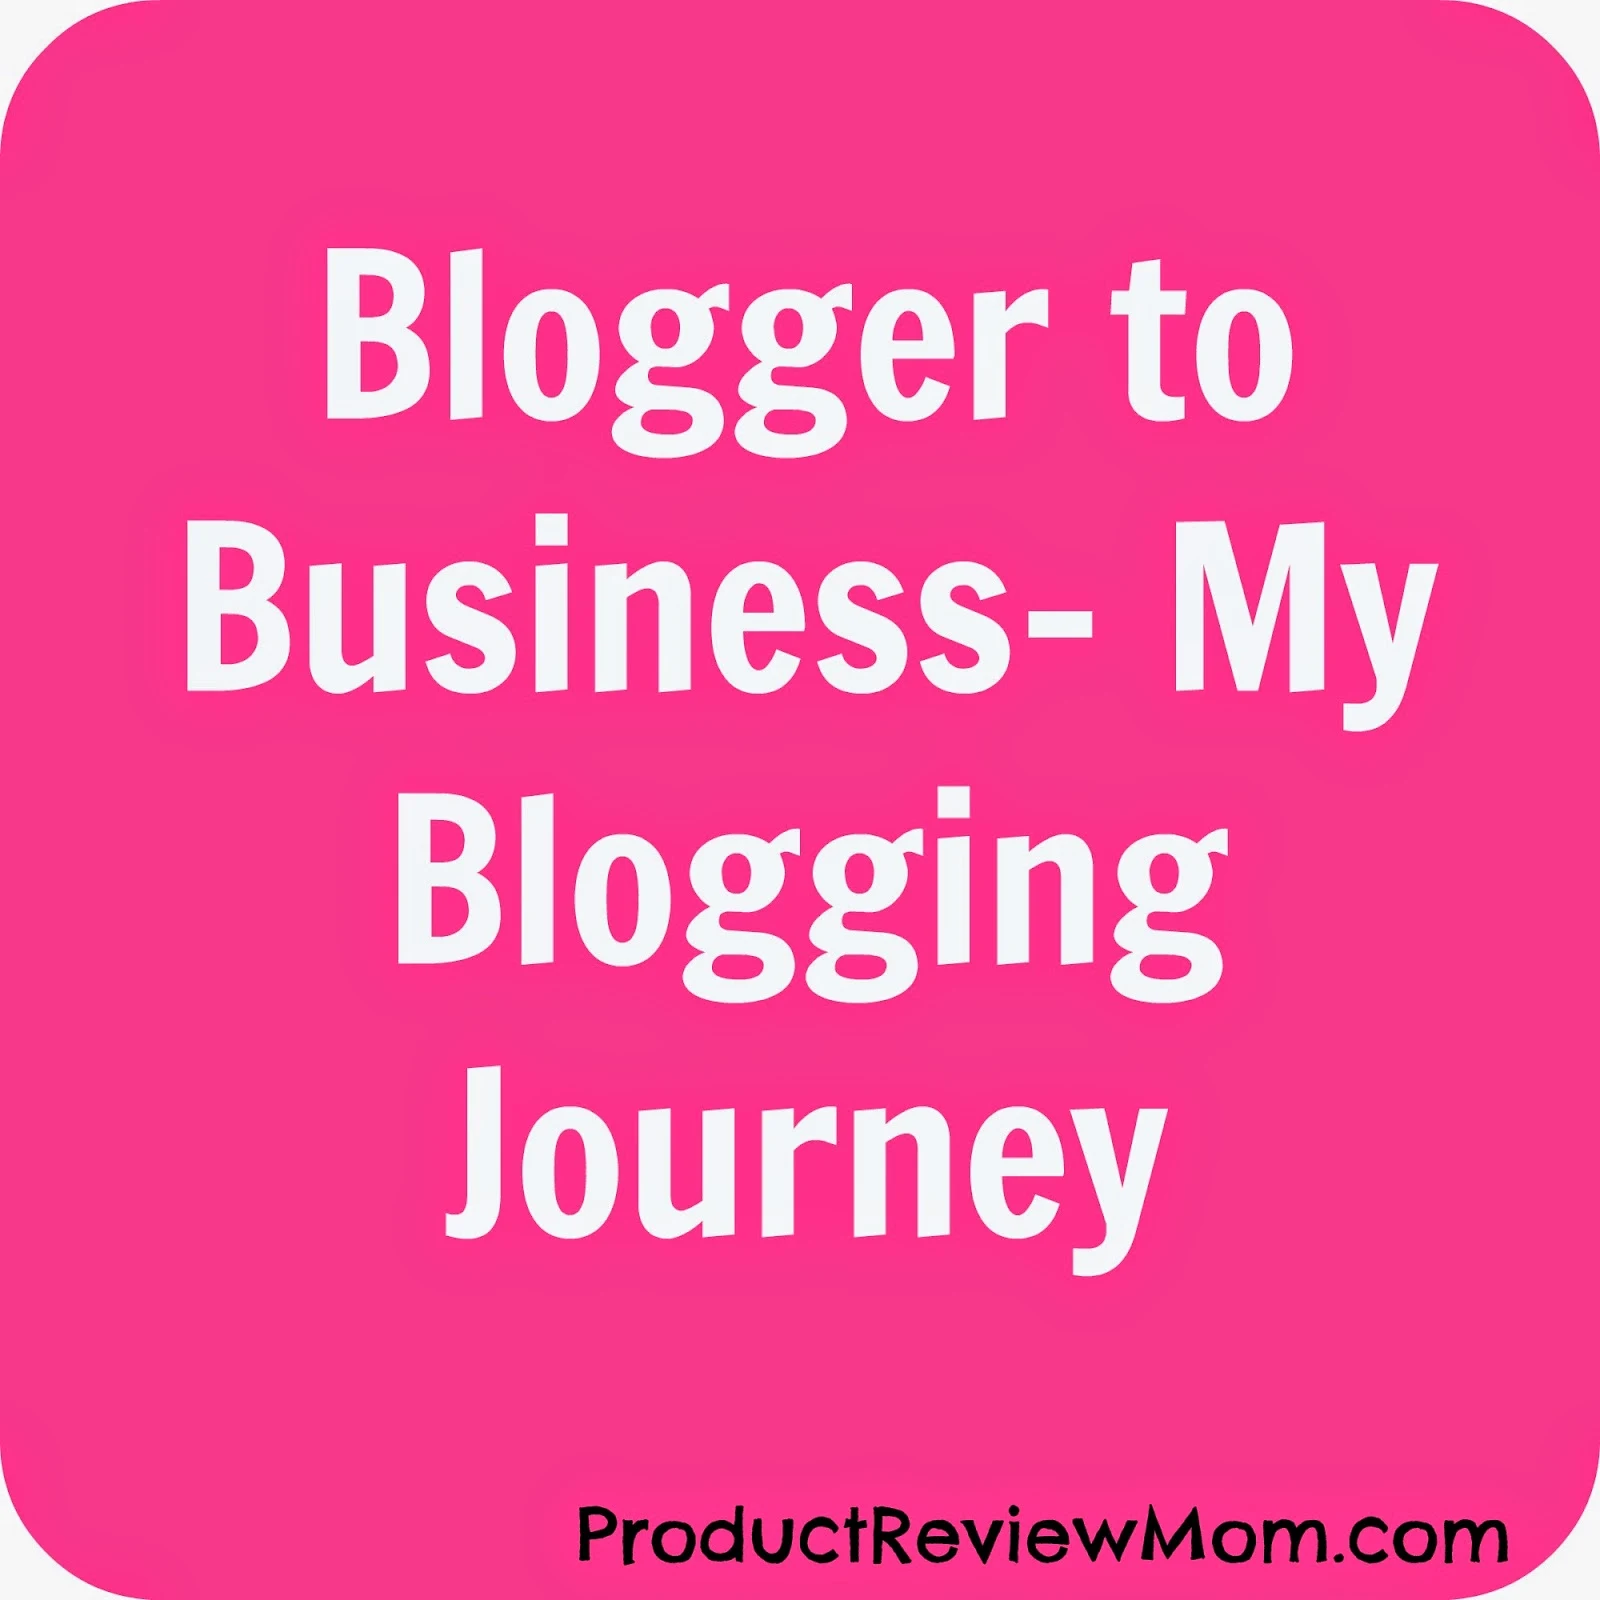 Blogger to Business- My Blogging Journey #BloggertoBusiness via www.Productreviewmom.com